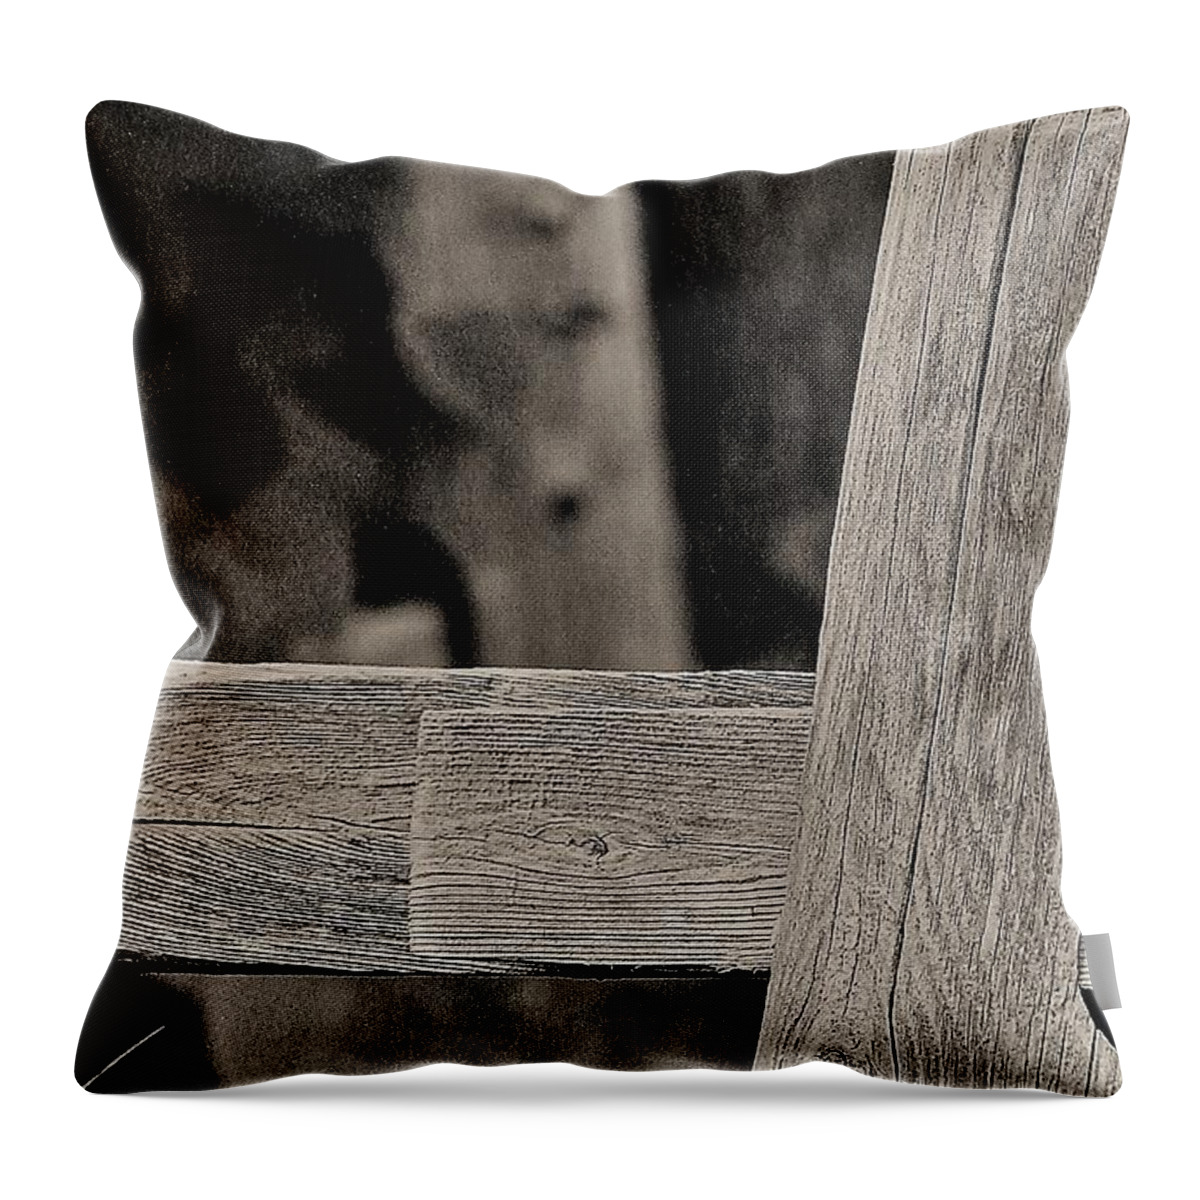 Fence Post Wood B&w Throw Pillow featuring the photograph Fence Post by John Linnemeyer